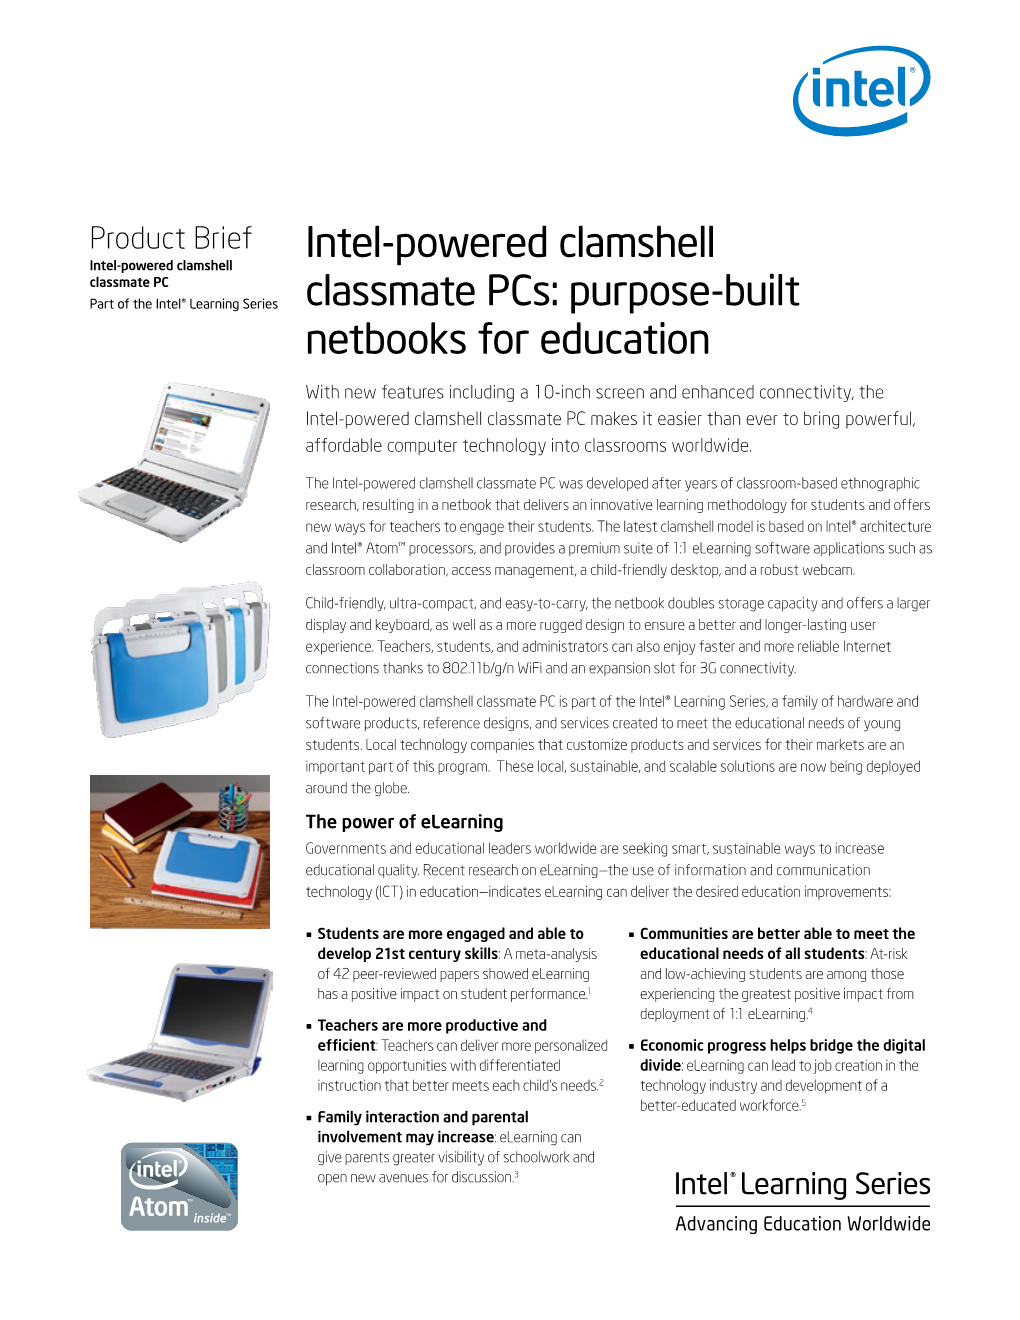 Product Brief: Intel-Powered Clamshel Classmate PC